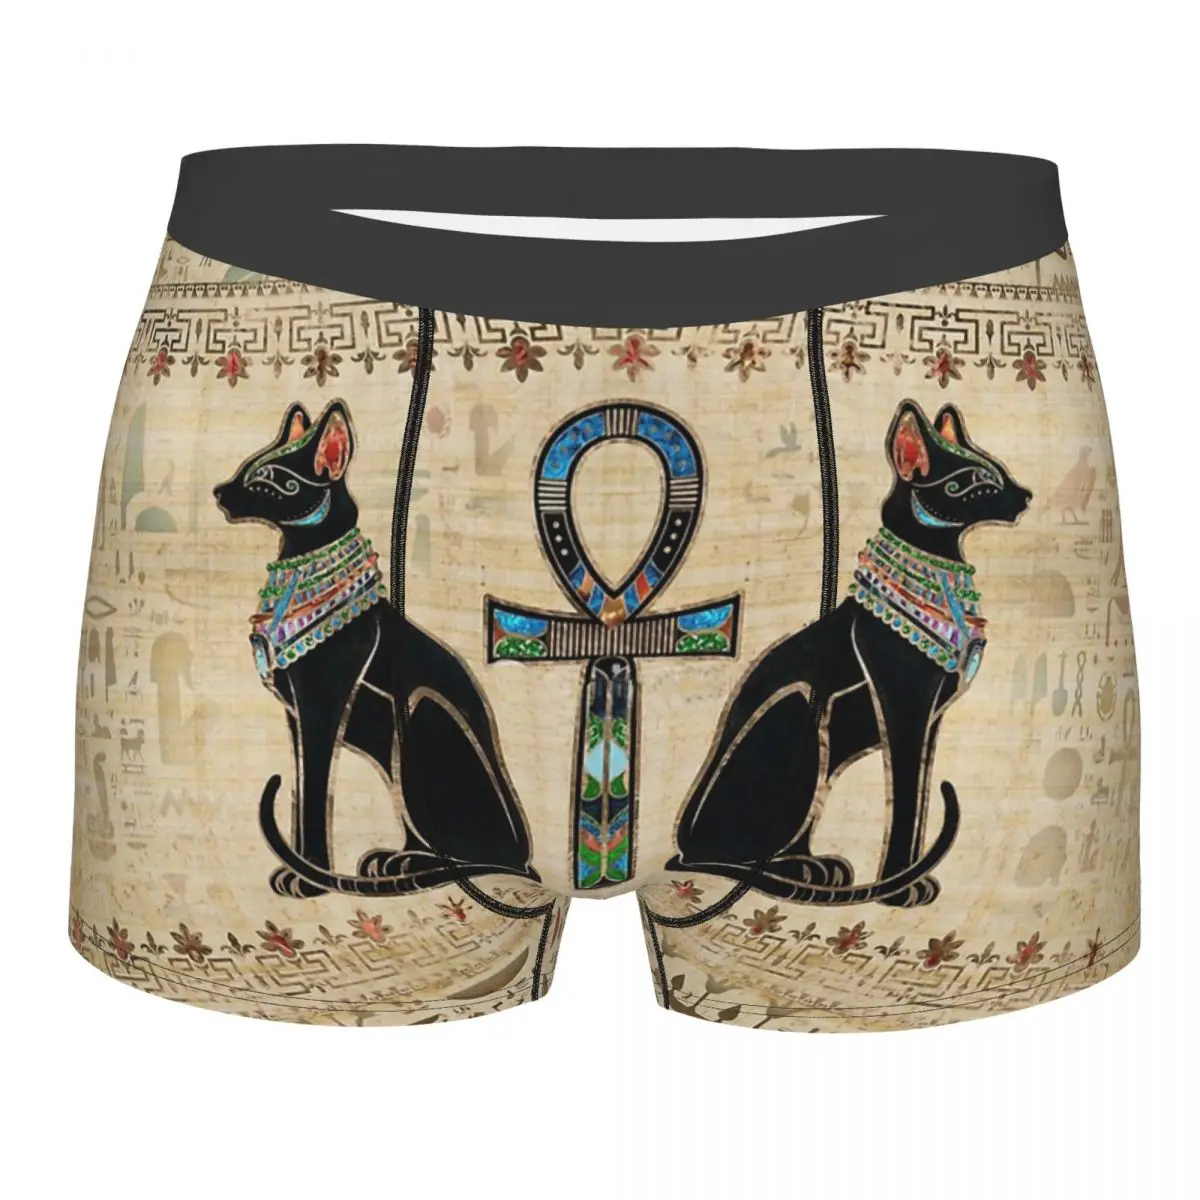 Cats And Ankh Cross Ancient Egypt Men's Boxer Briefs special Highly Breathable Underpants High Quality 3D Print Shorts Gift Idea suspicious cats pattern apron kitchen special accessories kitchen apron ladies hospitality aprons